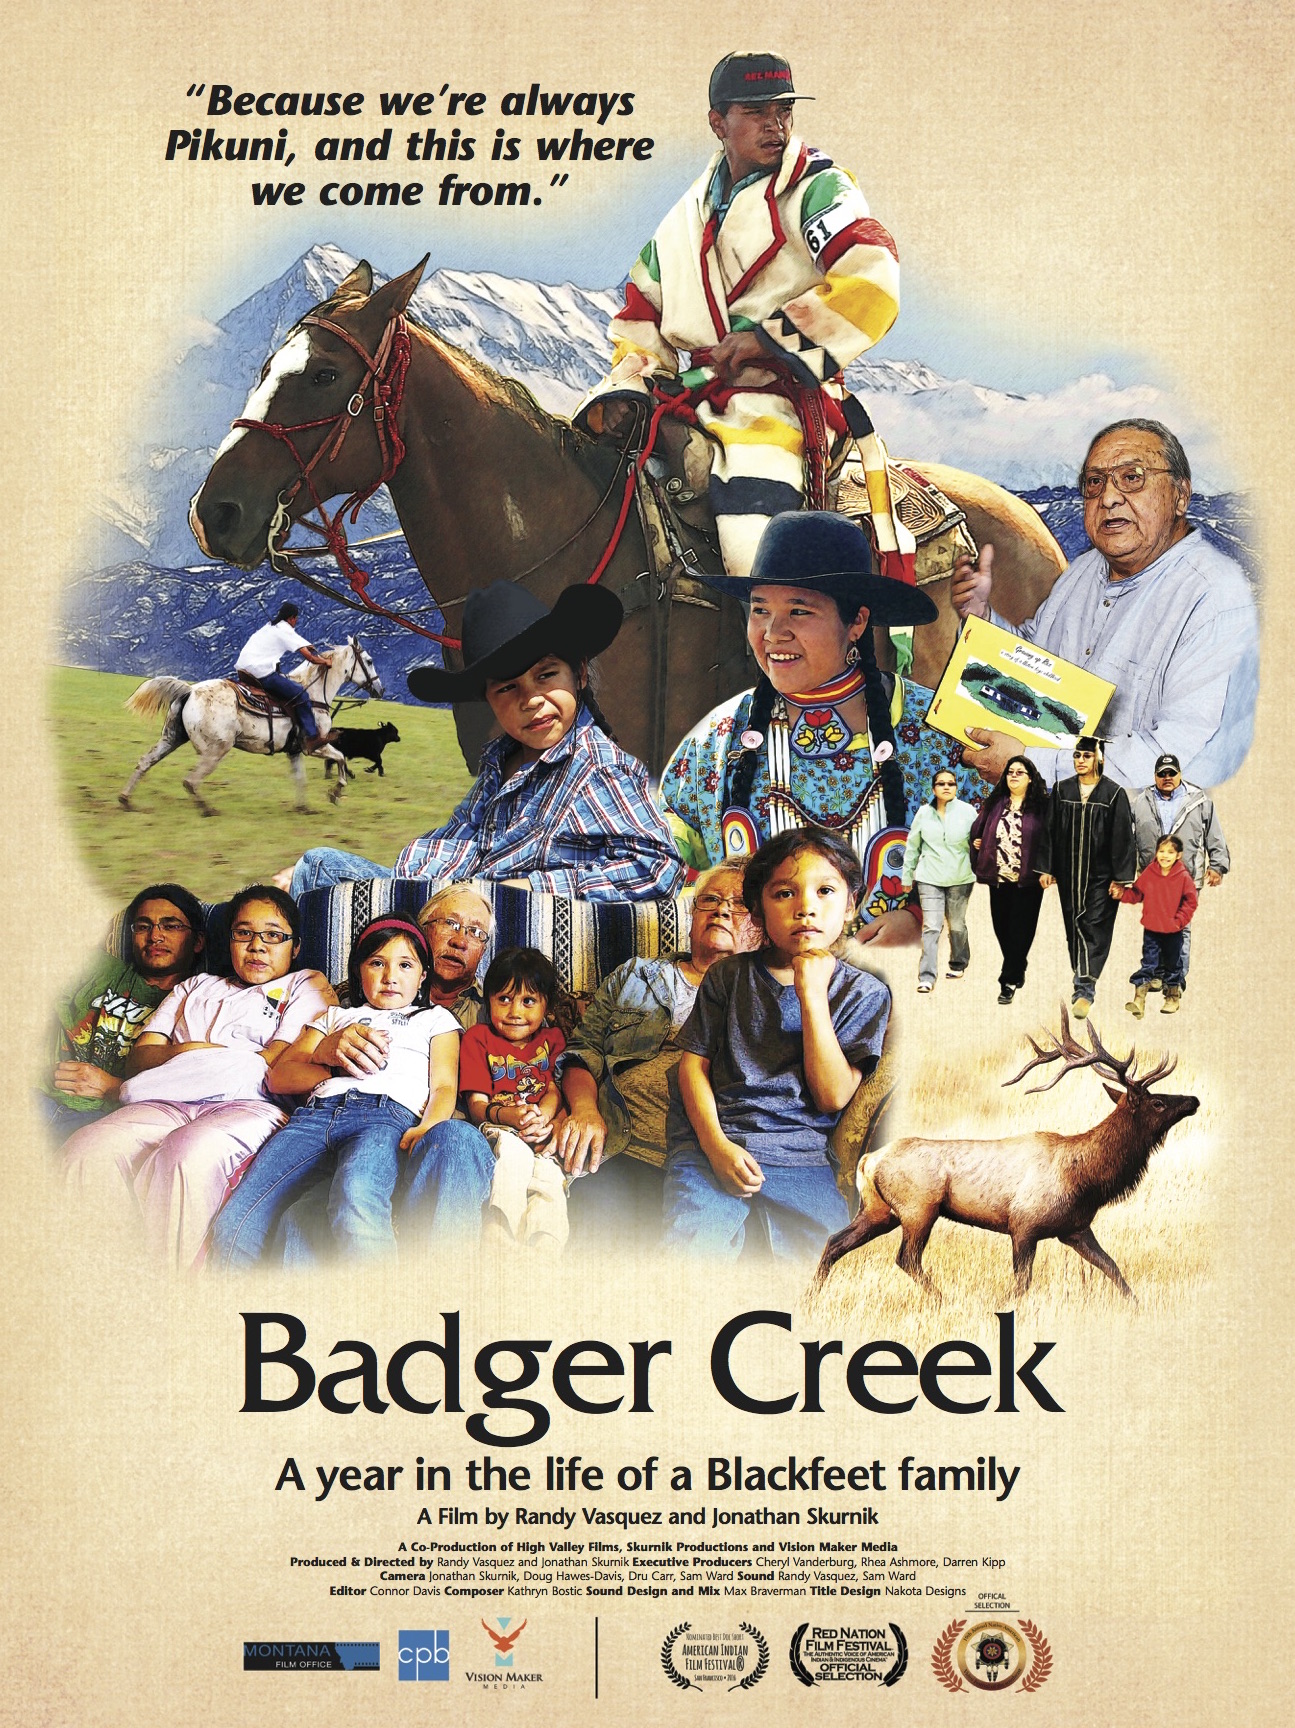 Cover art depicting various people and a horse.